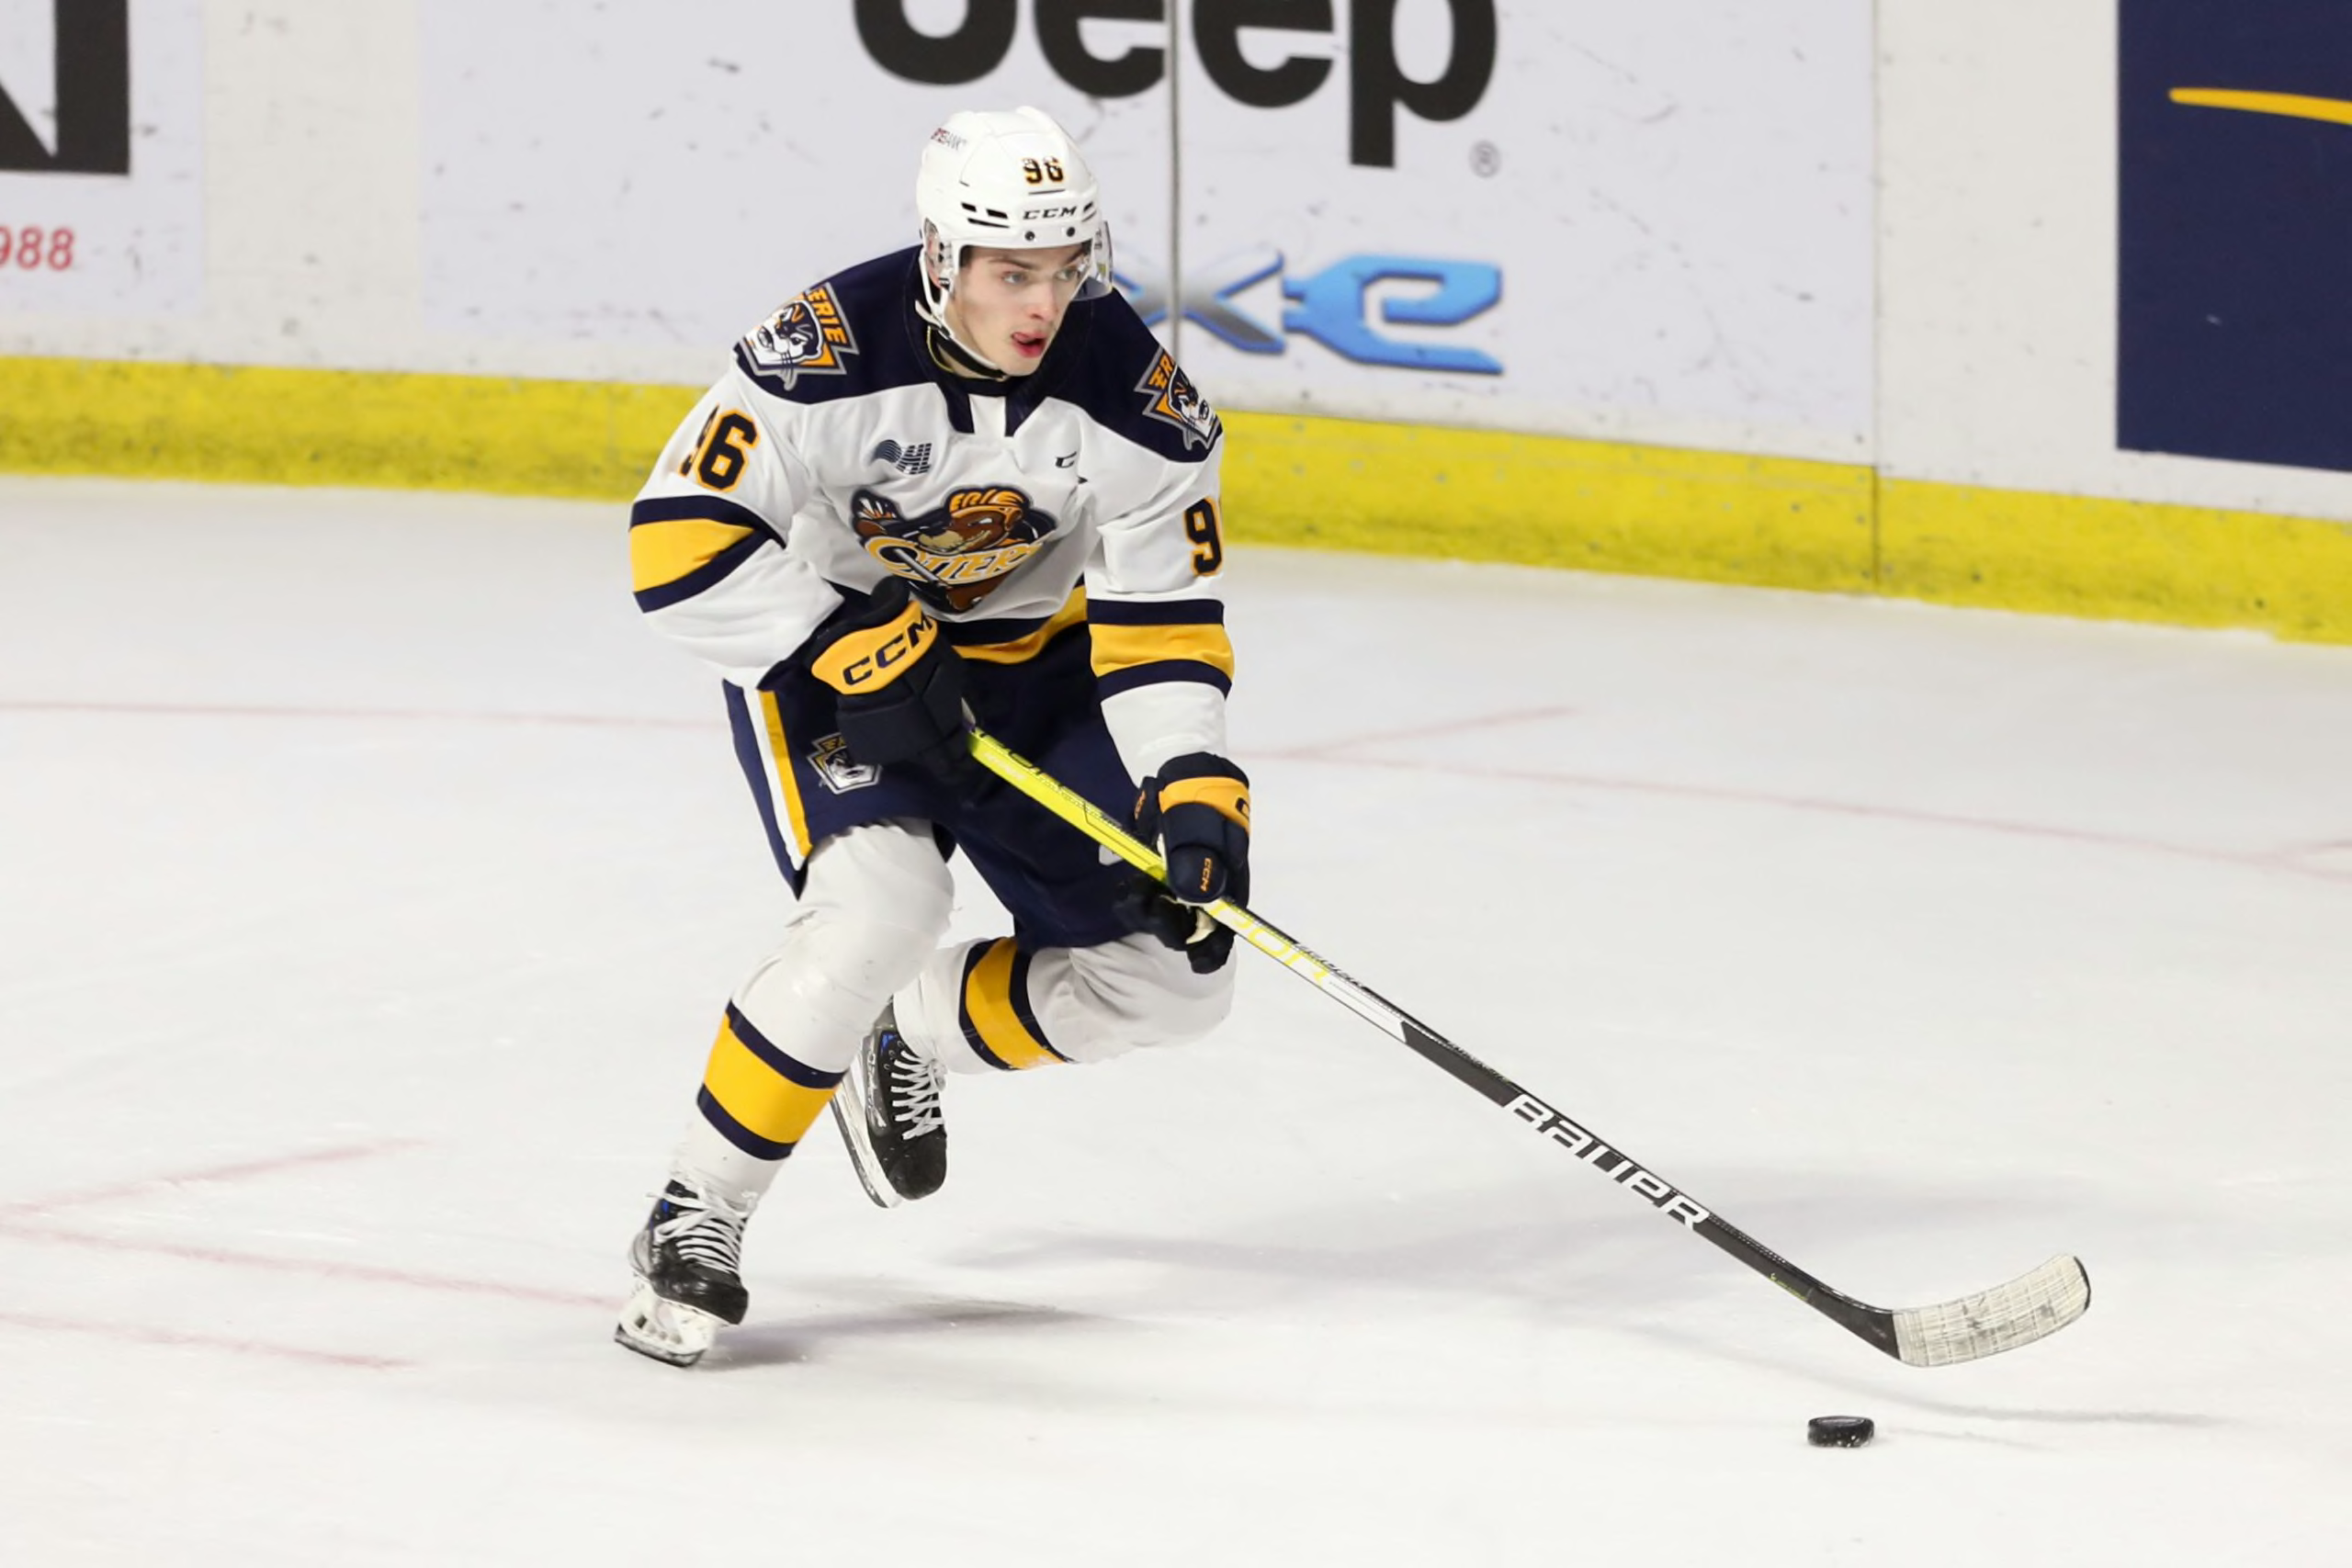 Otters select defenseman Sova in OHL draft's first round